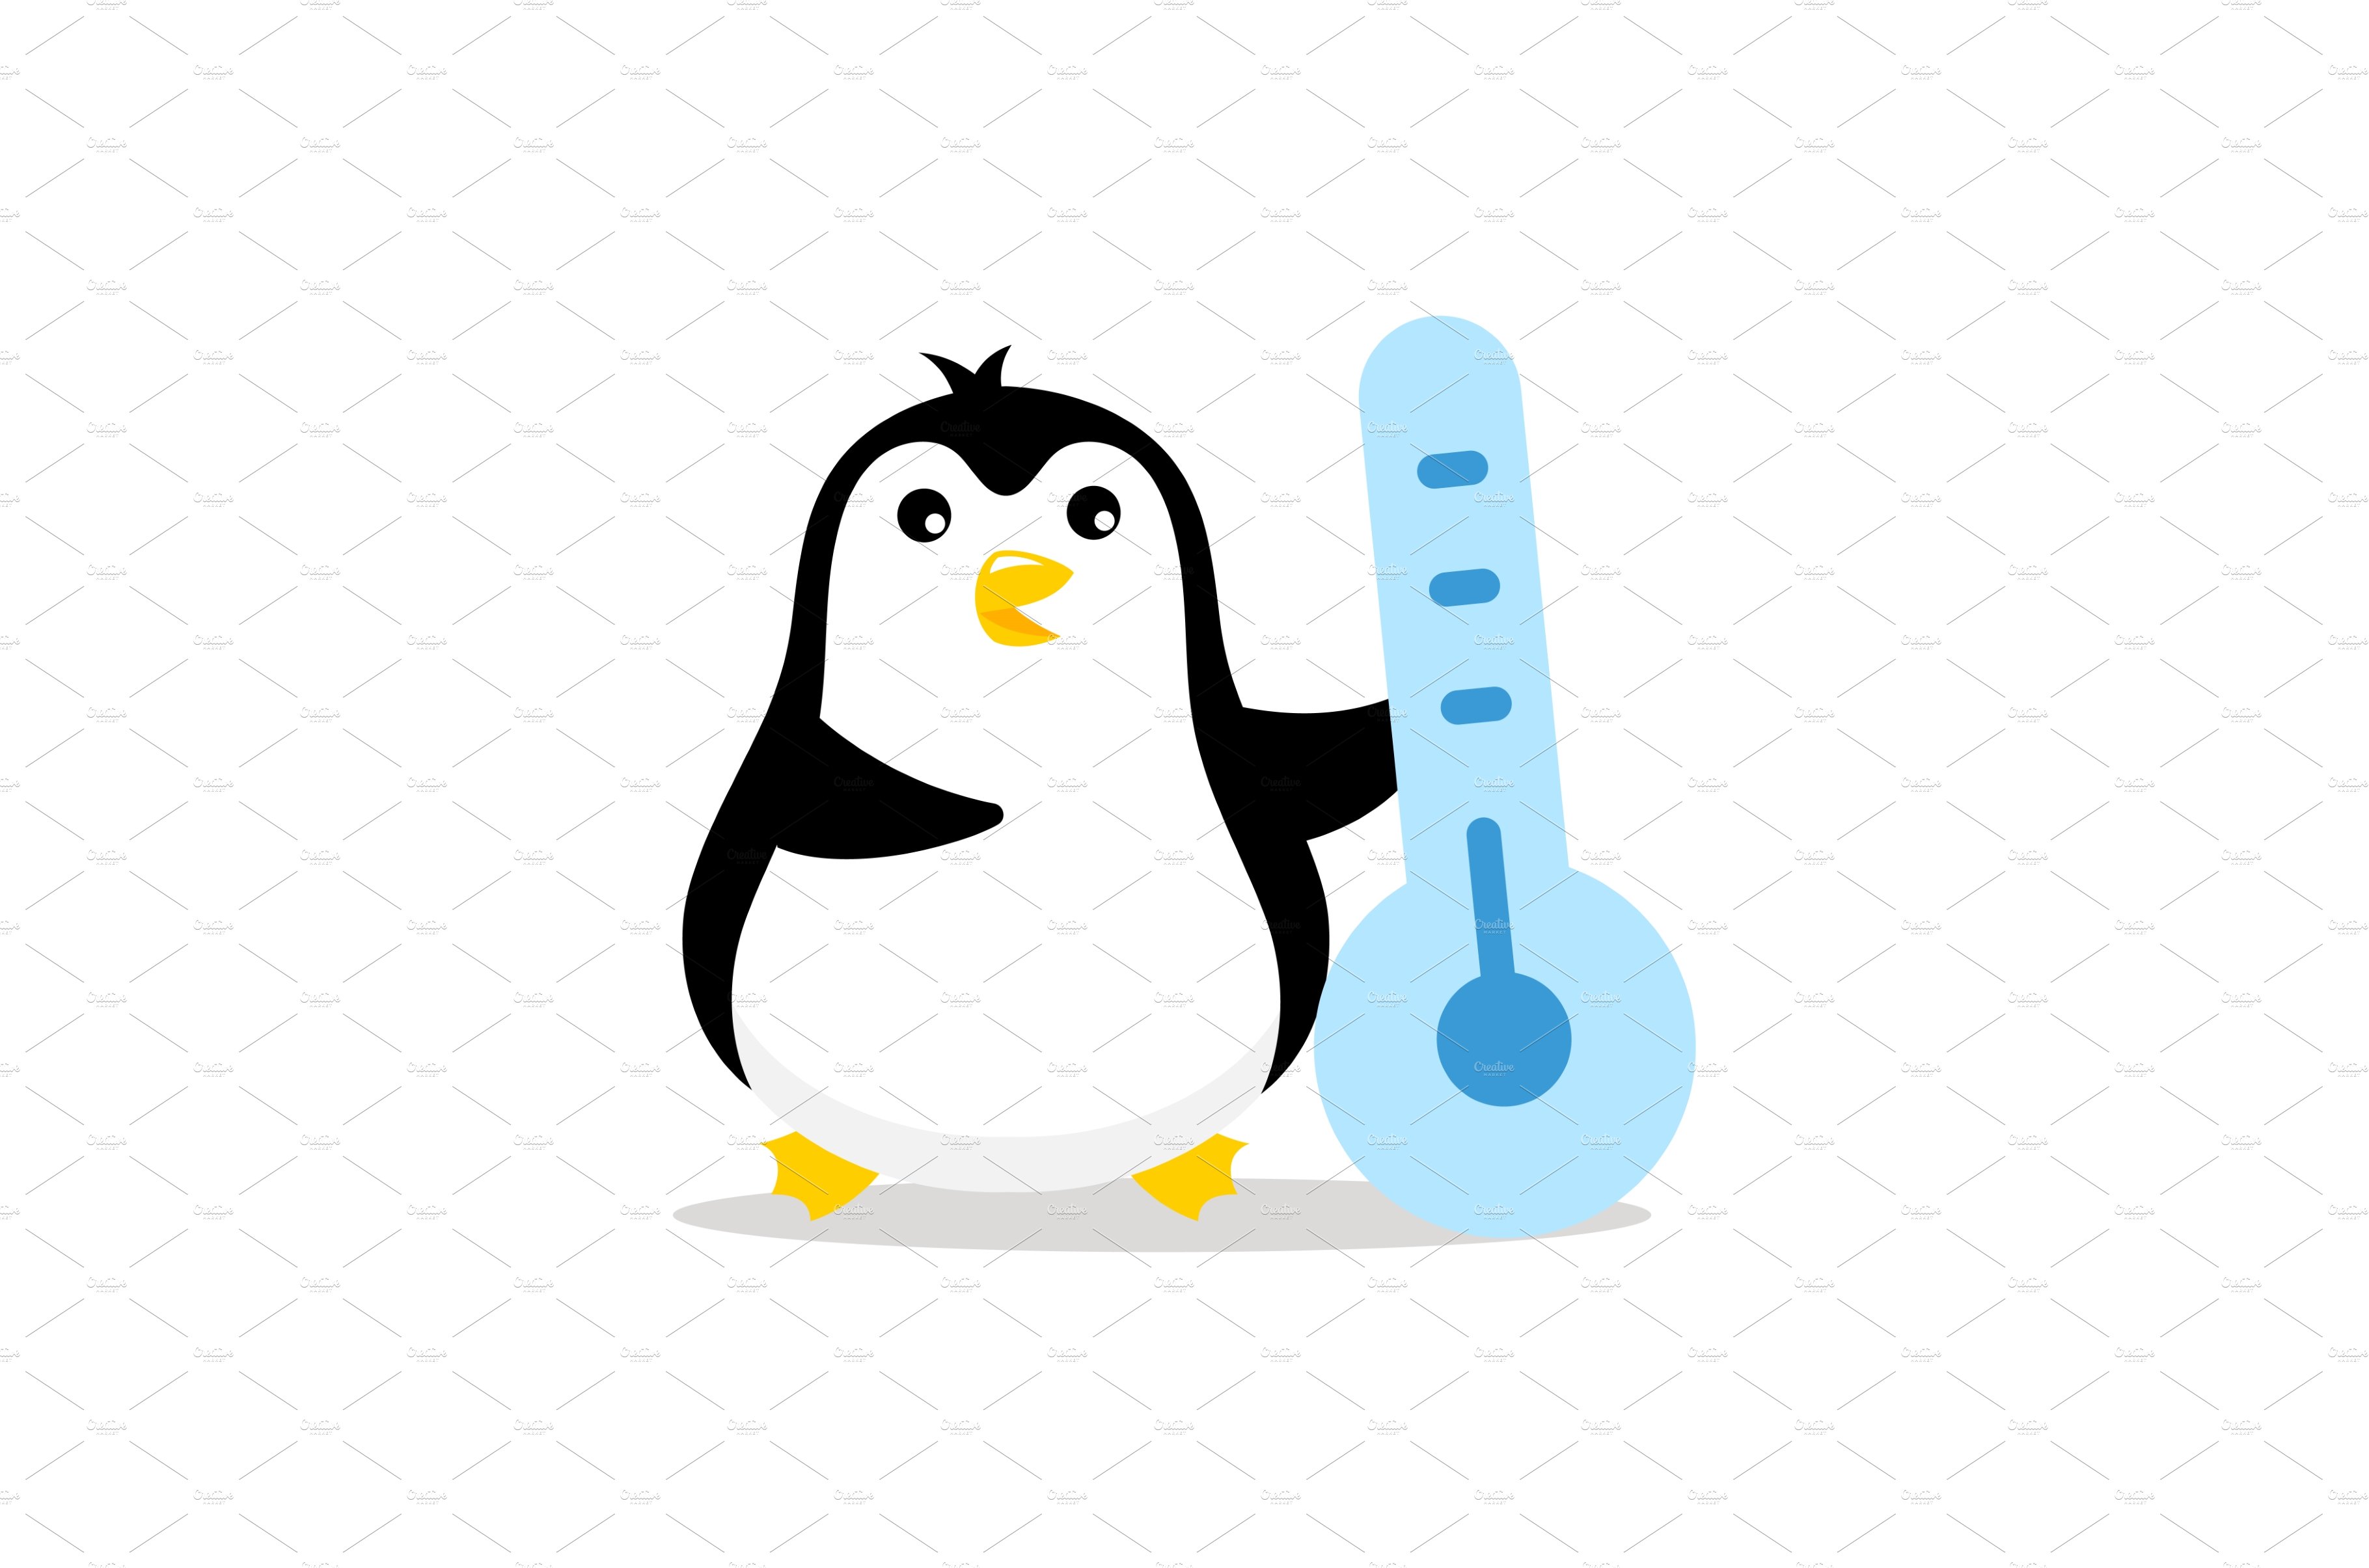 Pinguin with a thermometer. Low cover image.